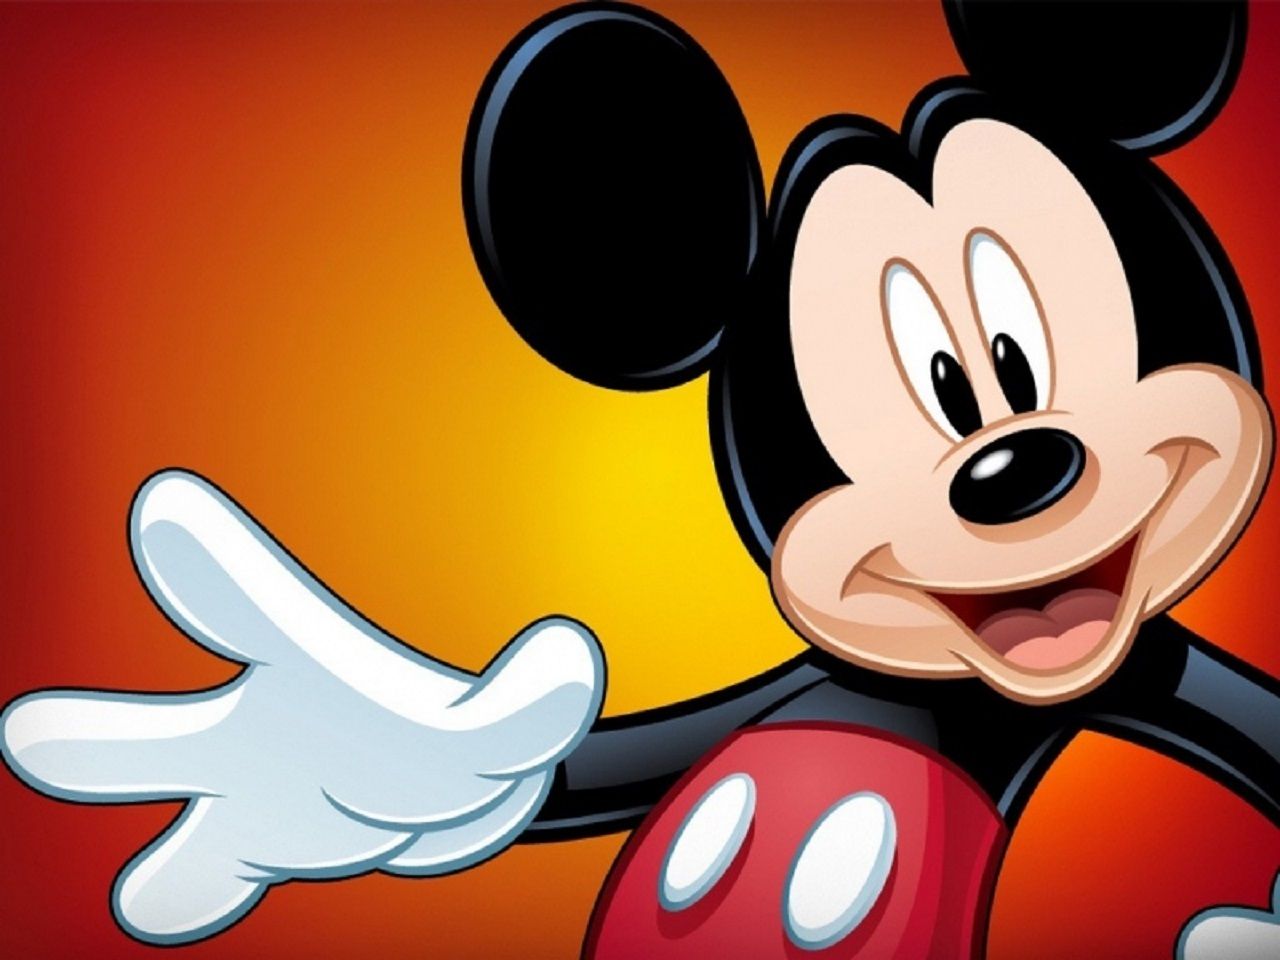 download wallpaper mickey mouse #19